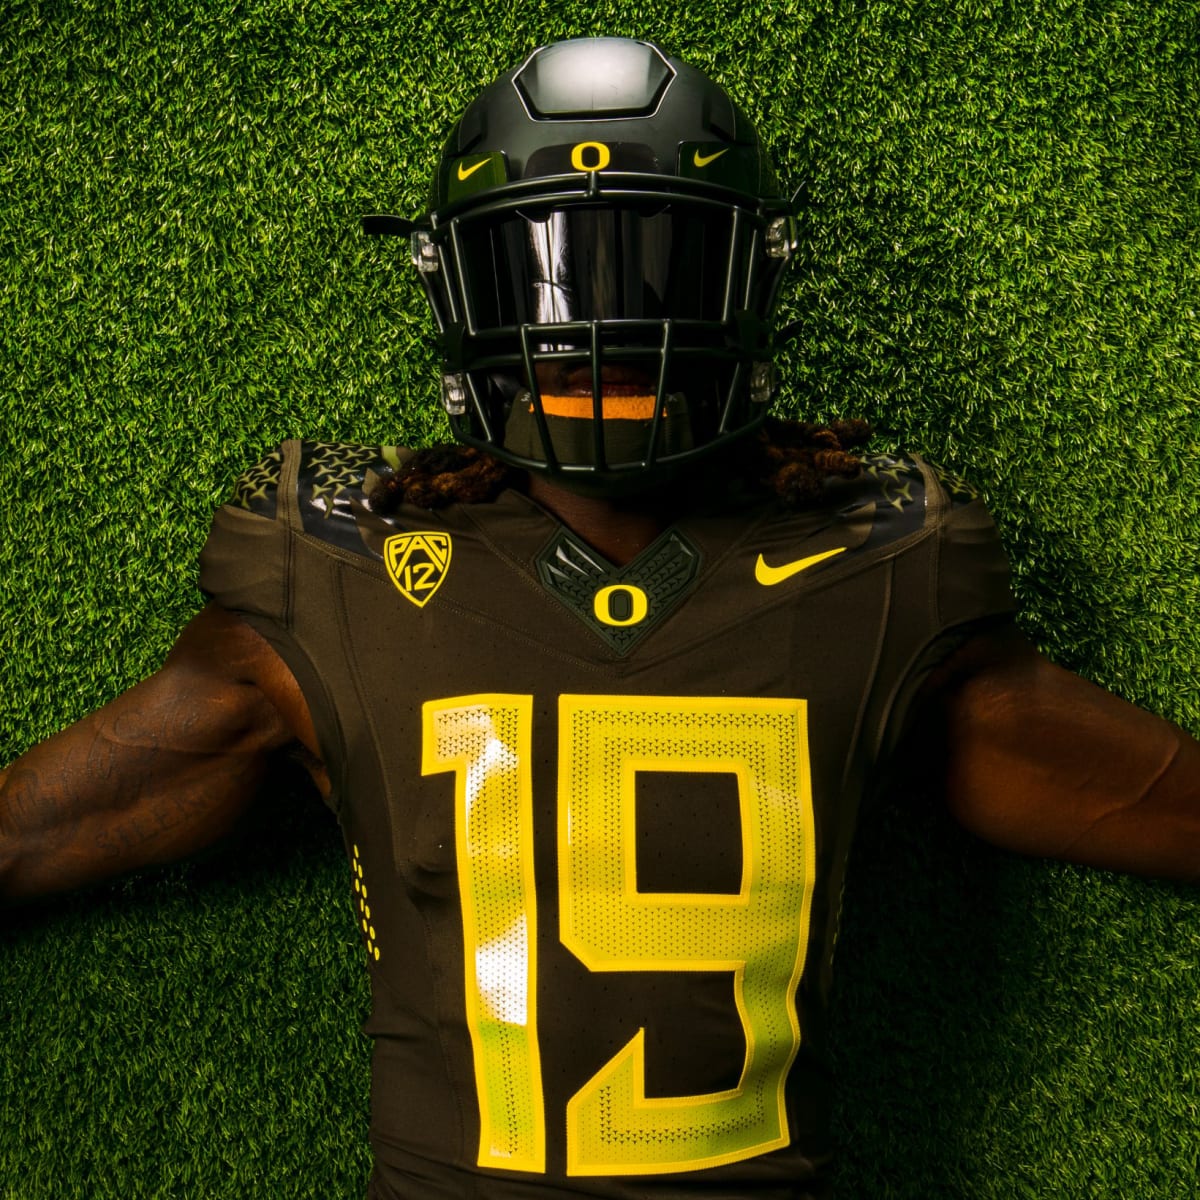 The Oregon Ducks' latest crazy football uniforms are designed to look like,  well, ducks